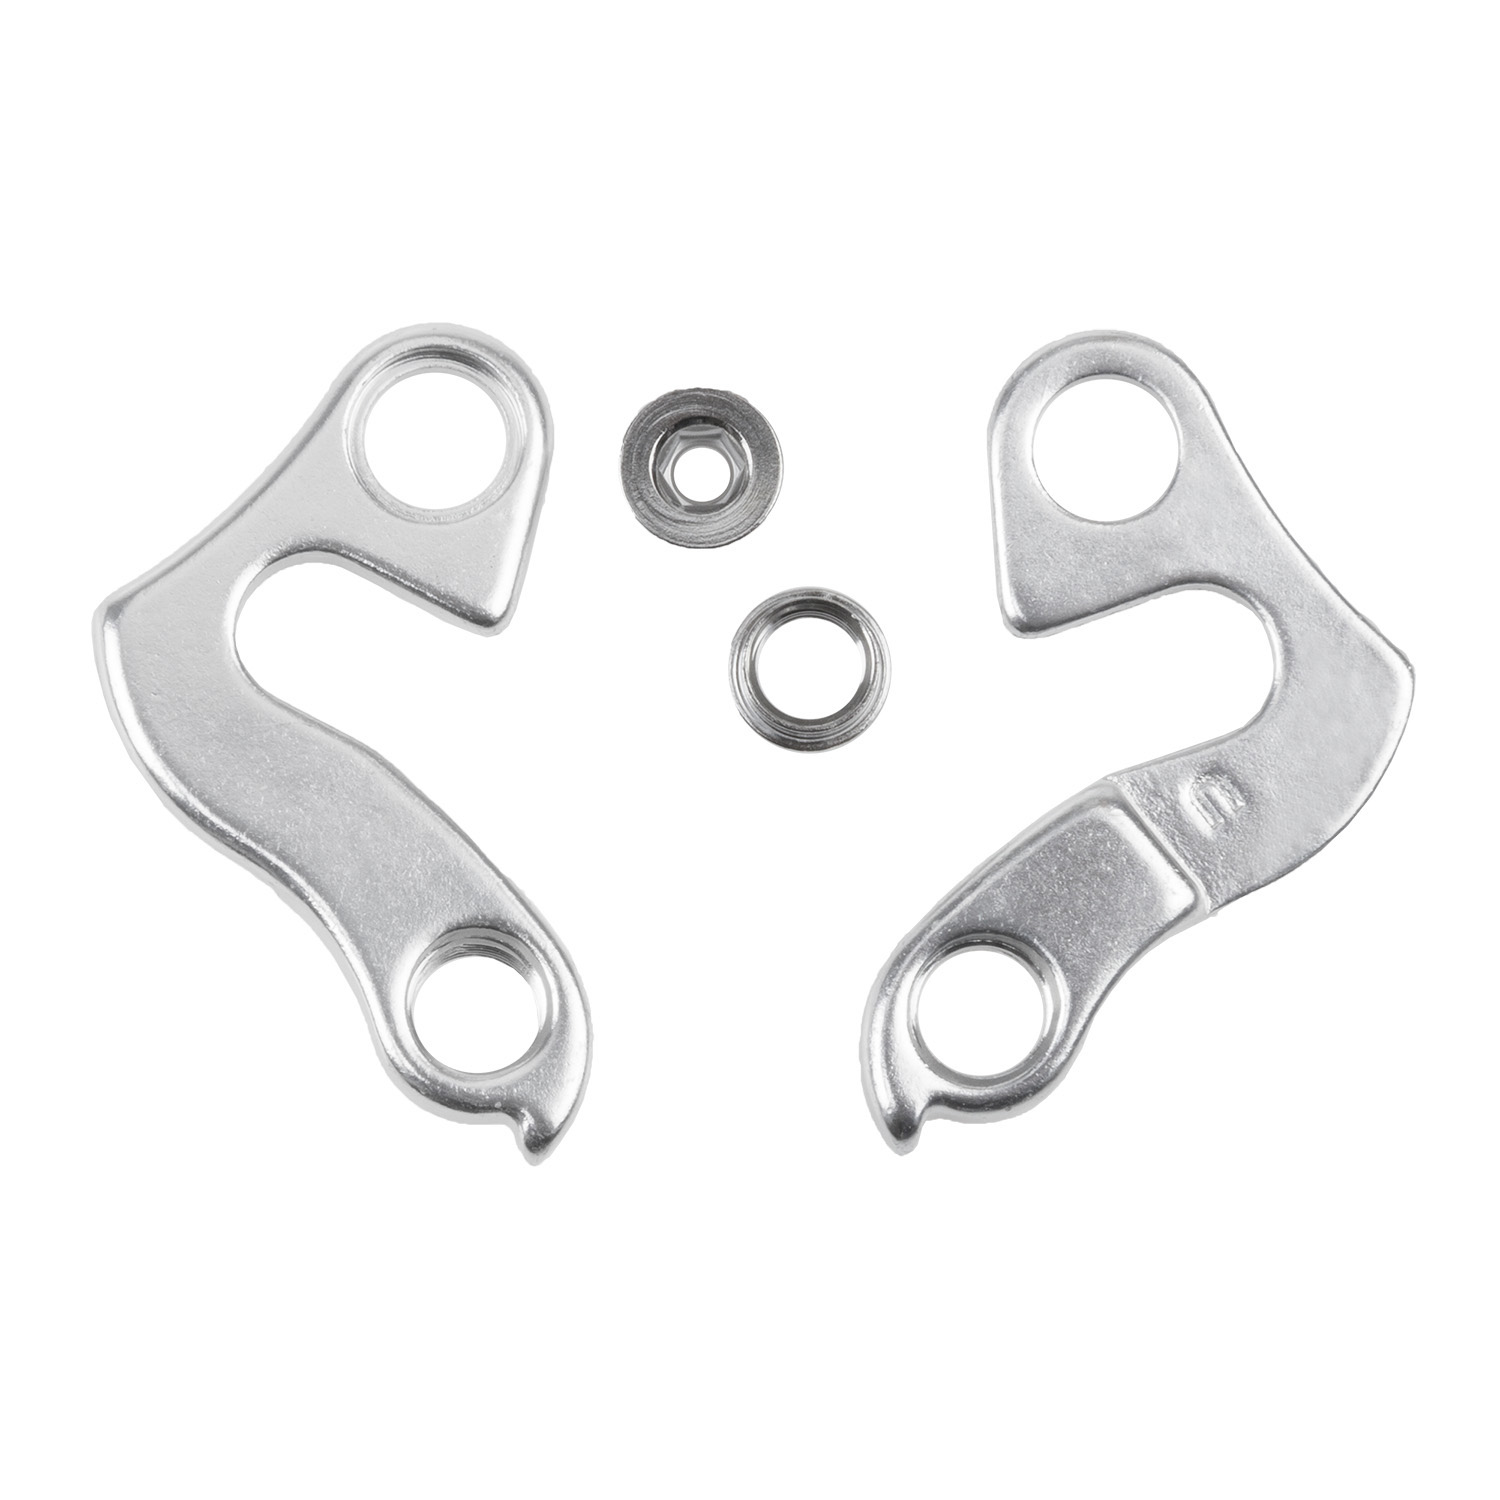 660846 S3 derailleur hanger – AVAILABLE IN SELECTED BIKE SHOPS